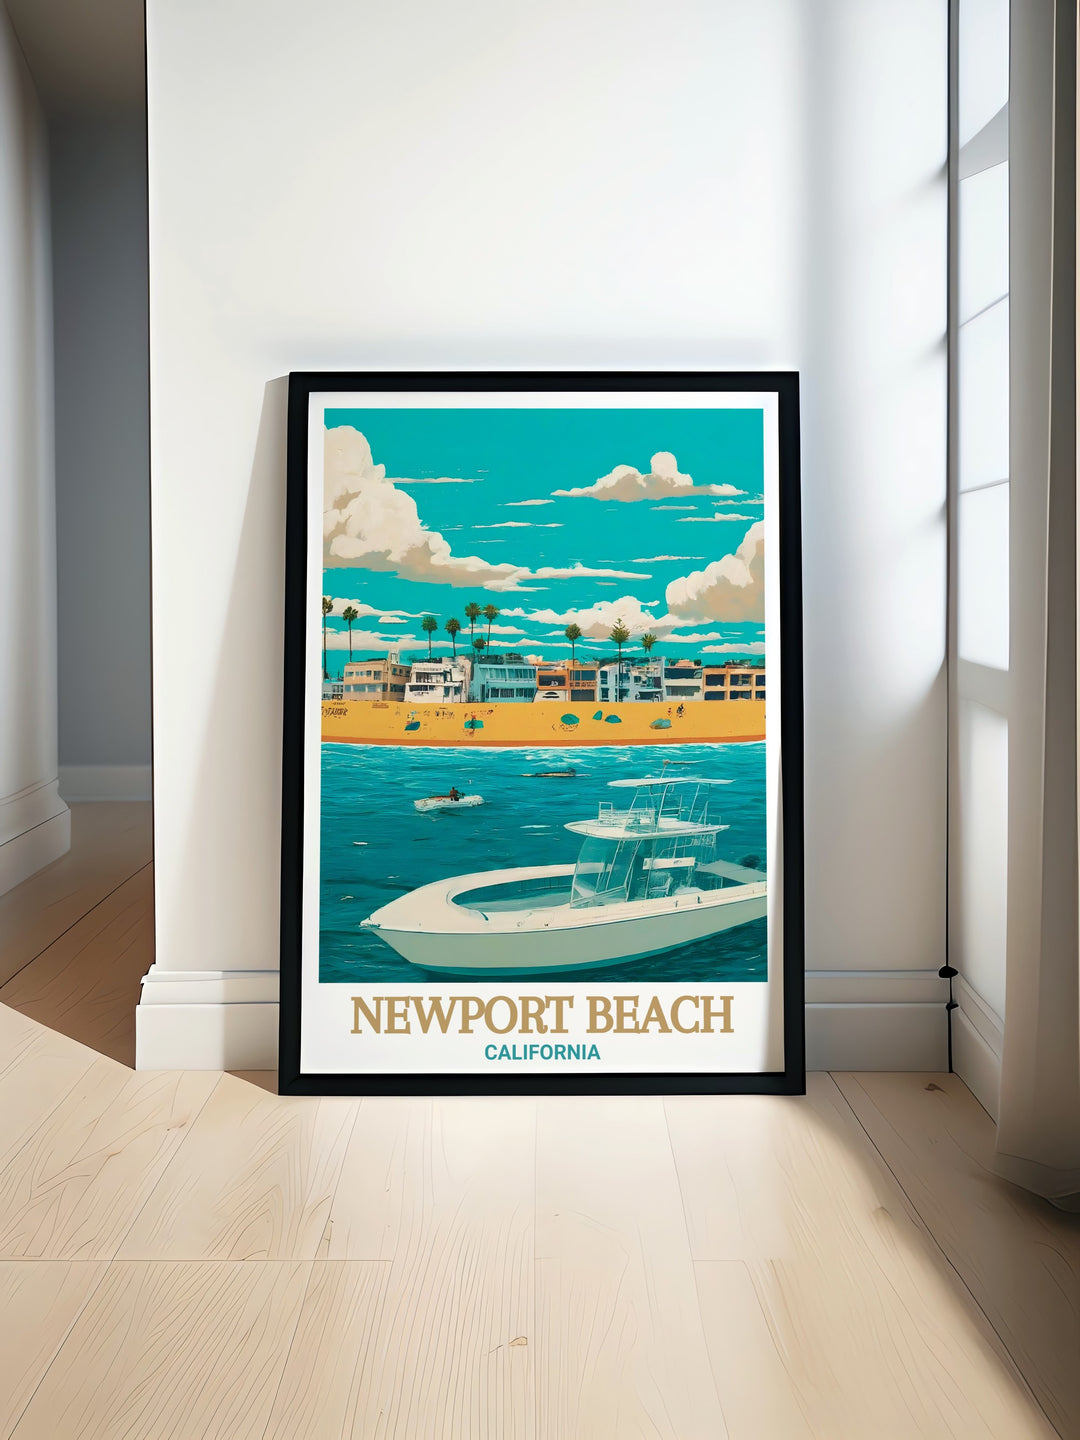 Newport Beach artwork featuring Balboa Island brings the serene beauty of Californias coastline to your home. Perfect for adding a touch of coastal elegance to your decor. The detailed design showcases the charm and vibrant atmosphere of this iconic destination.